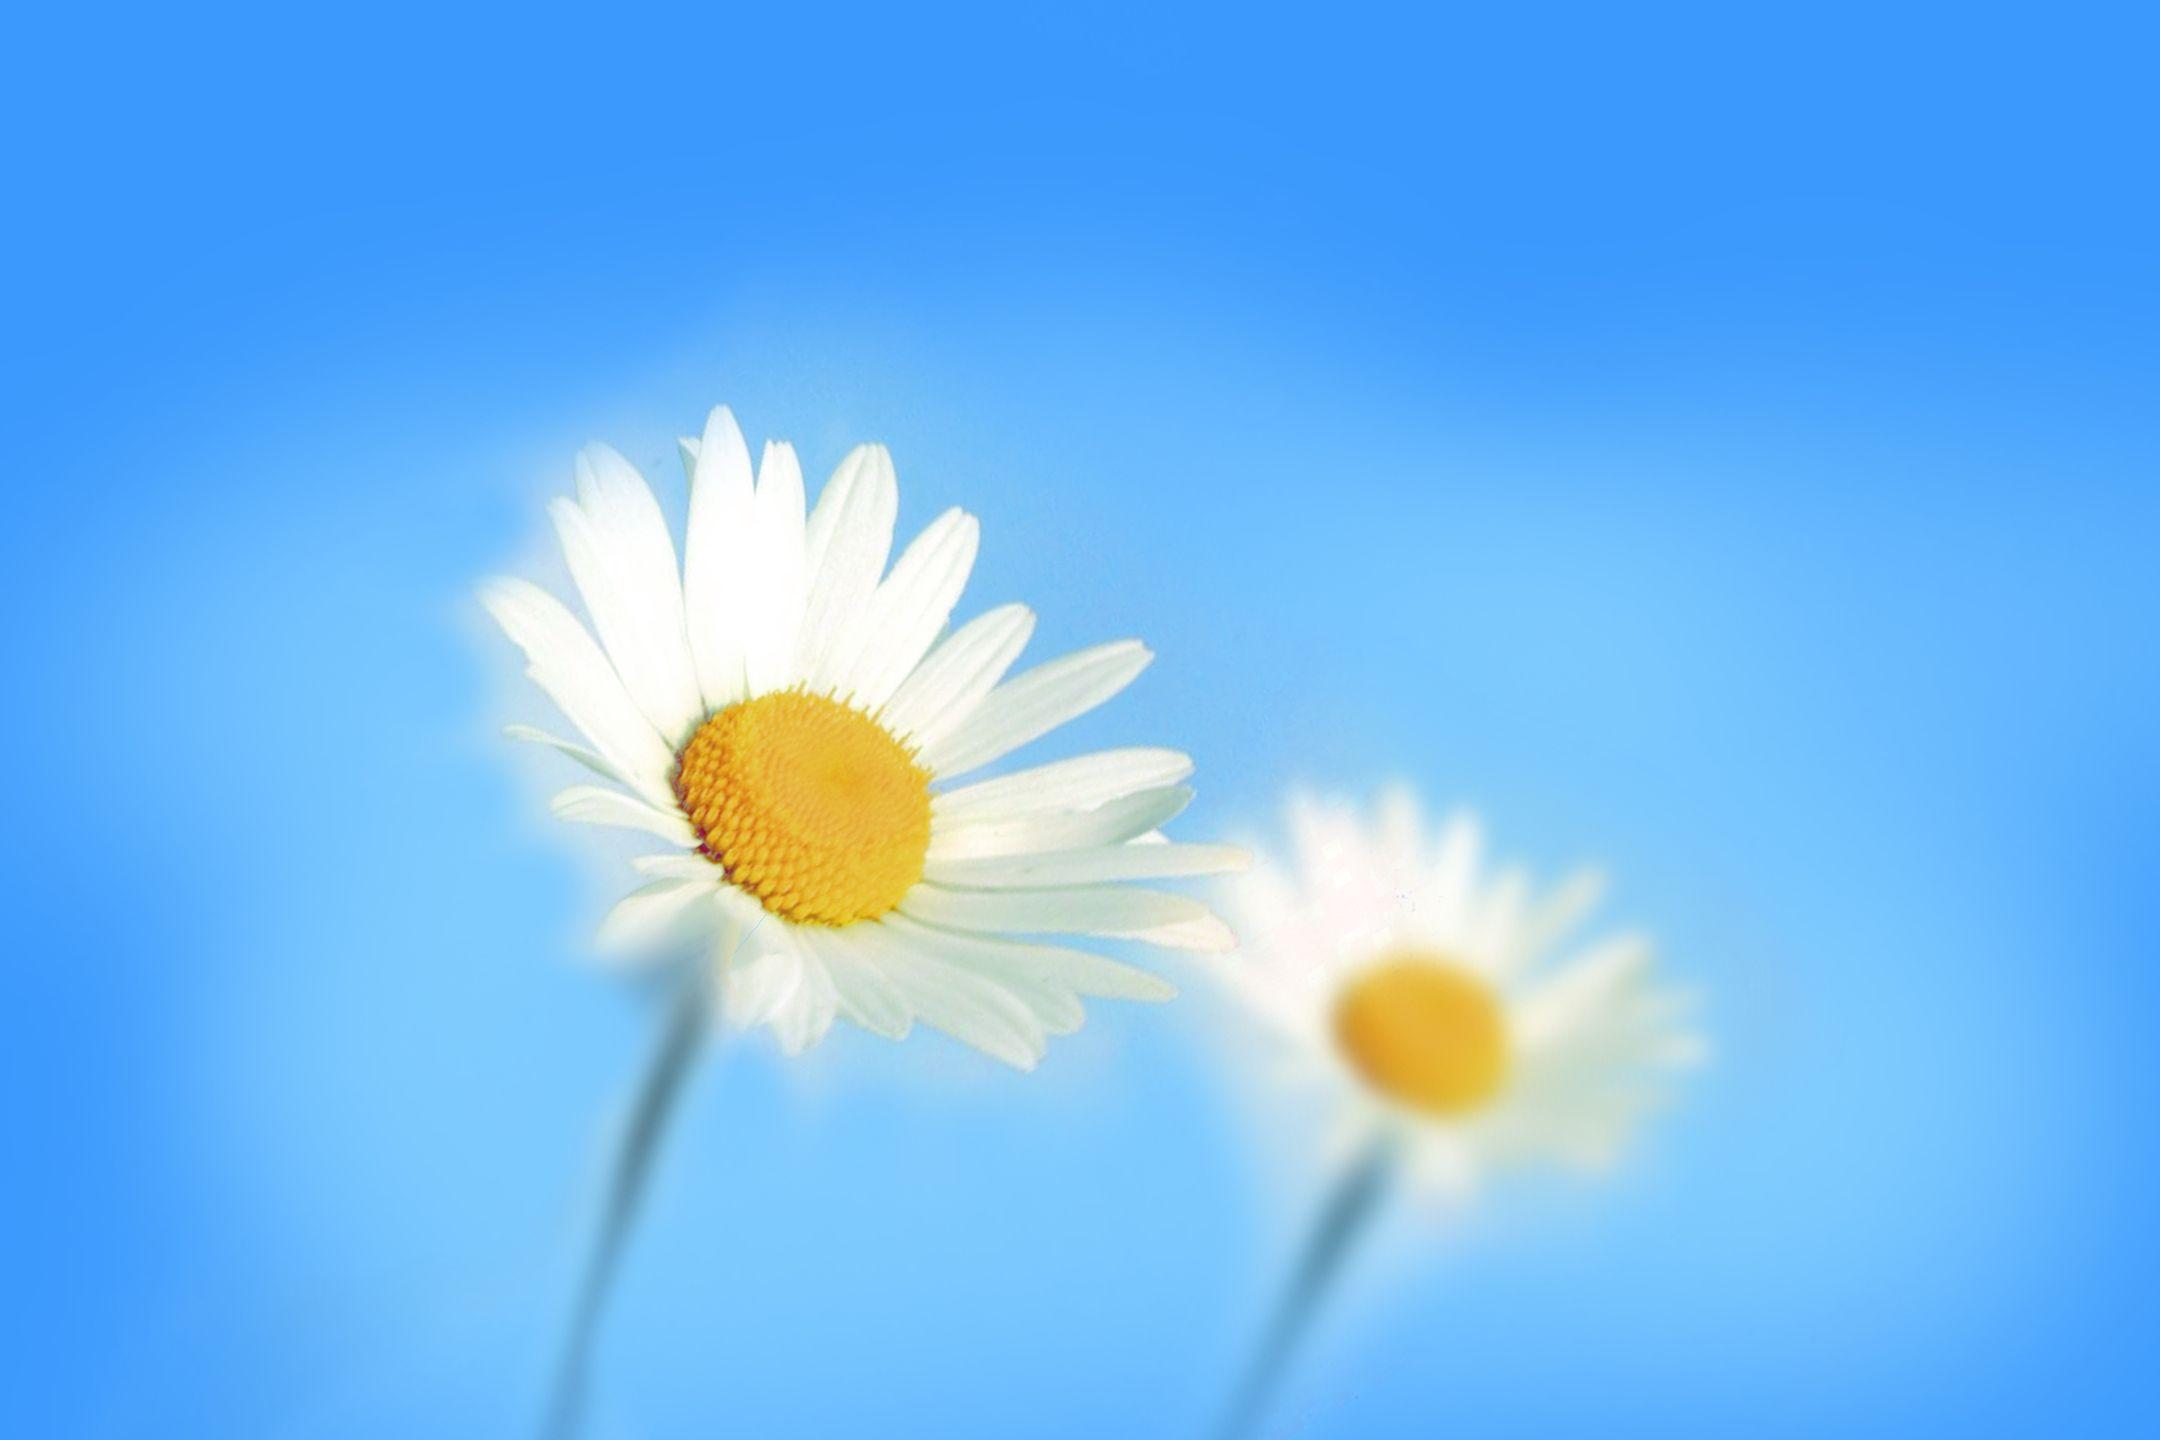 15 Outstanding windows flower desktop wallpaper You Can Save It For ...